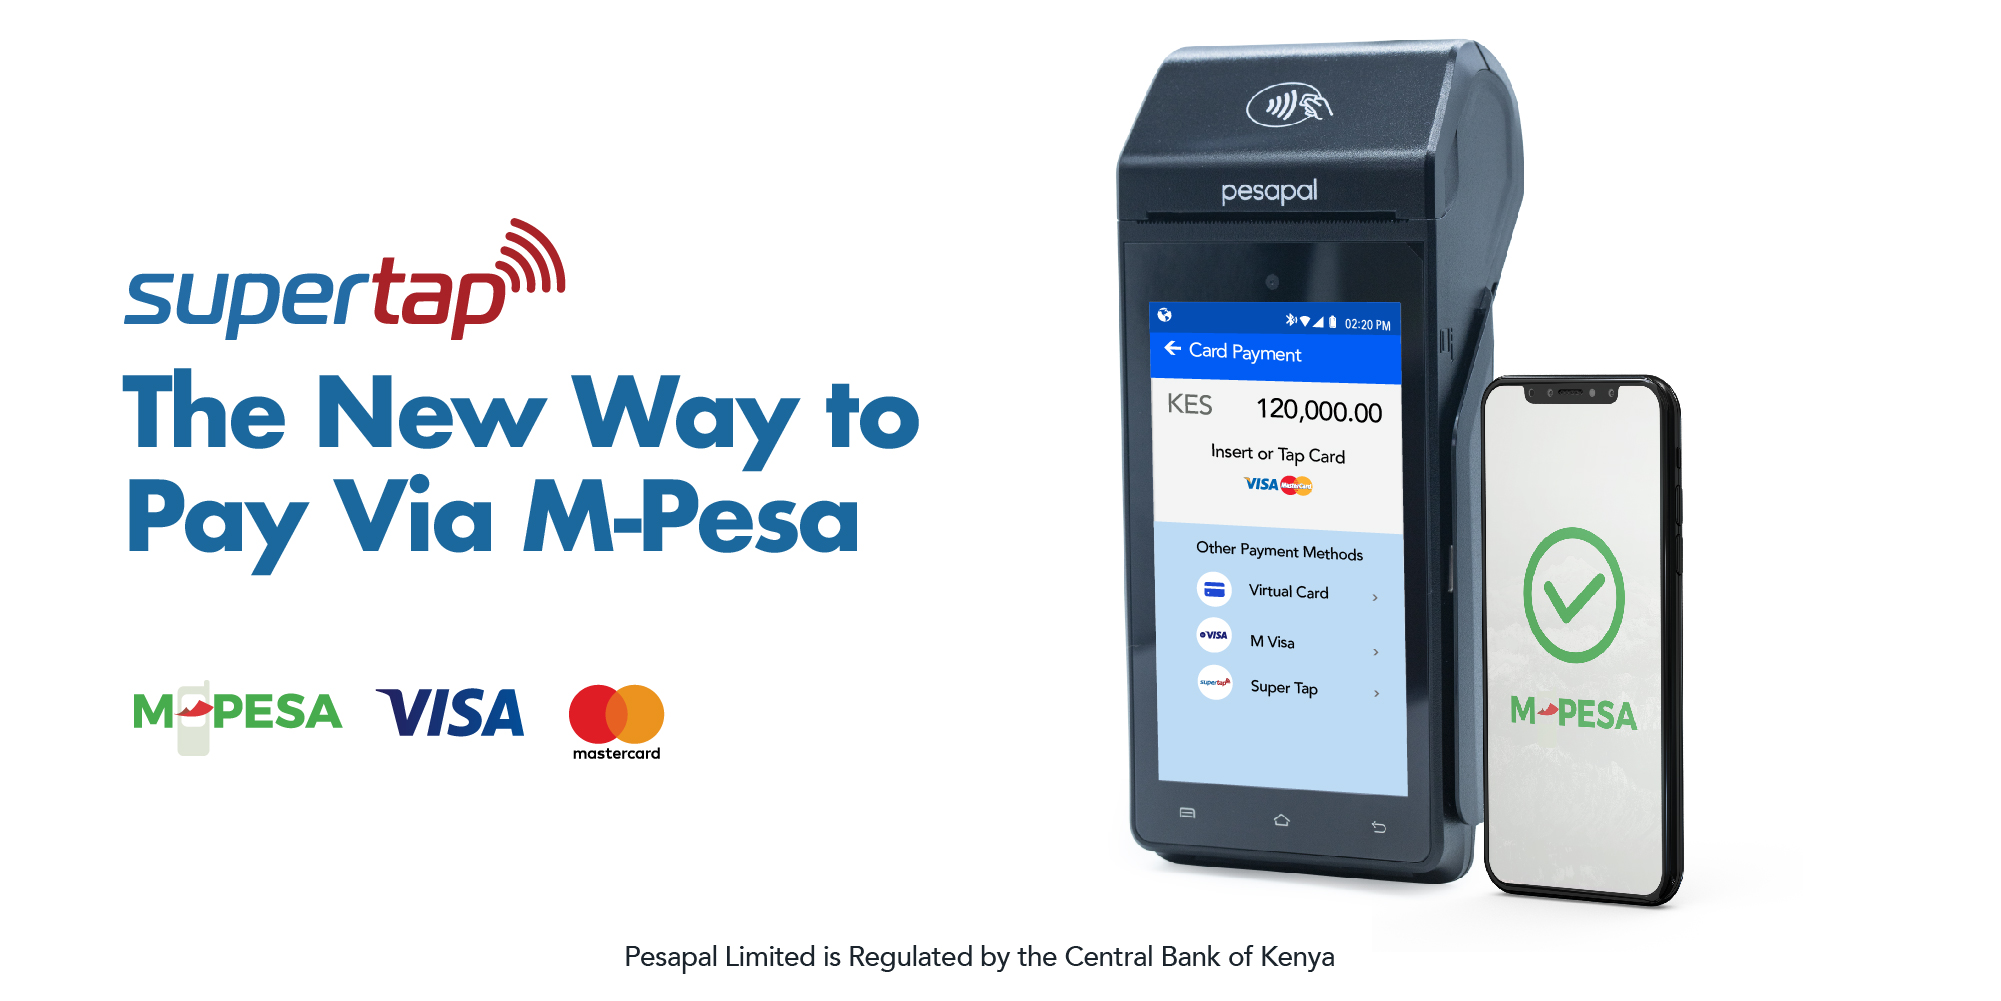 Pesapal Launches Supertap - All You Need To Know